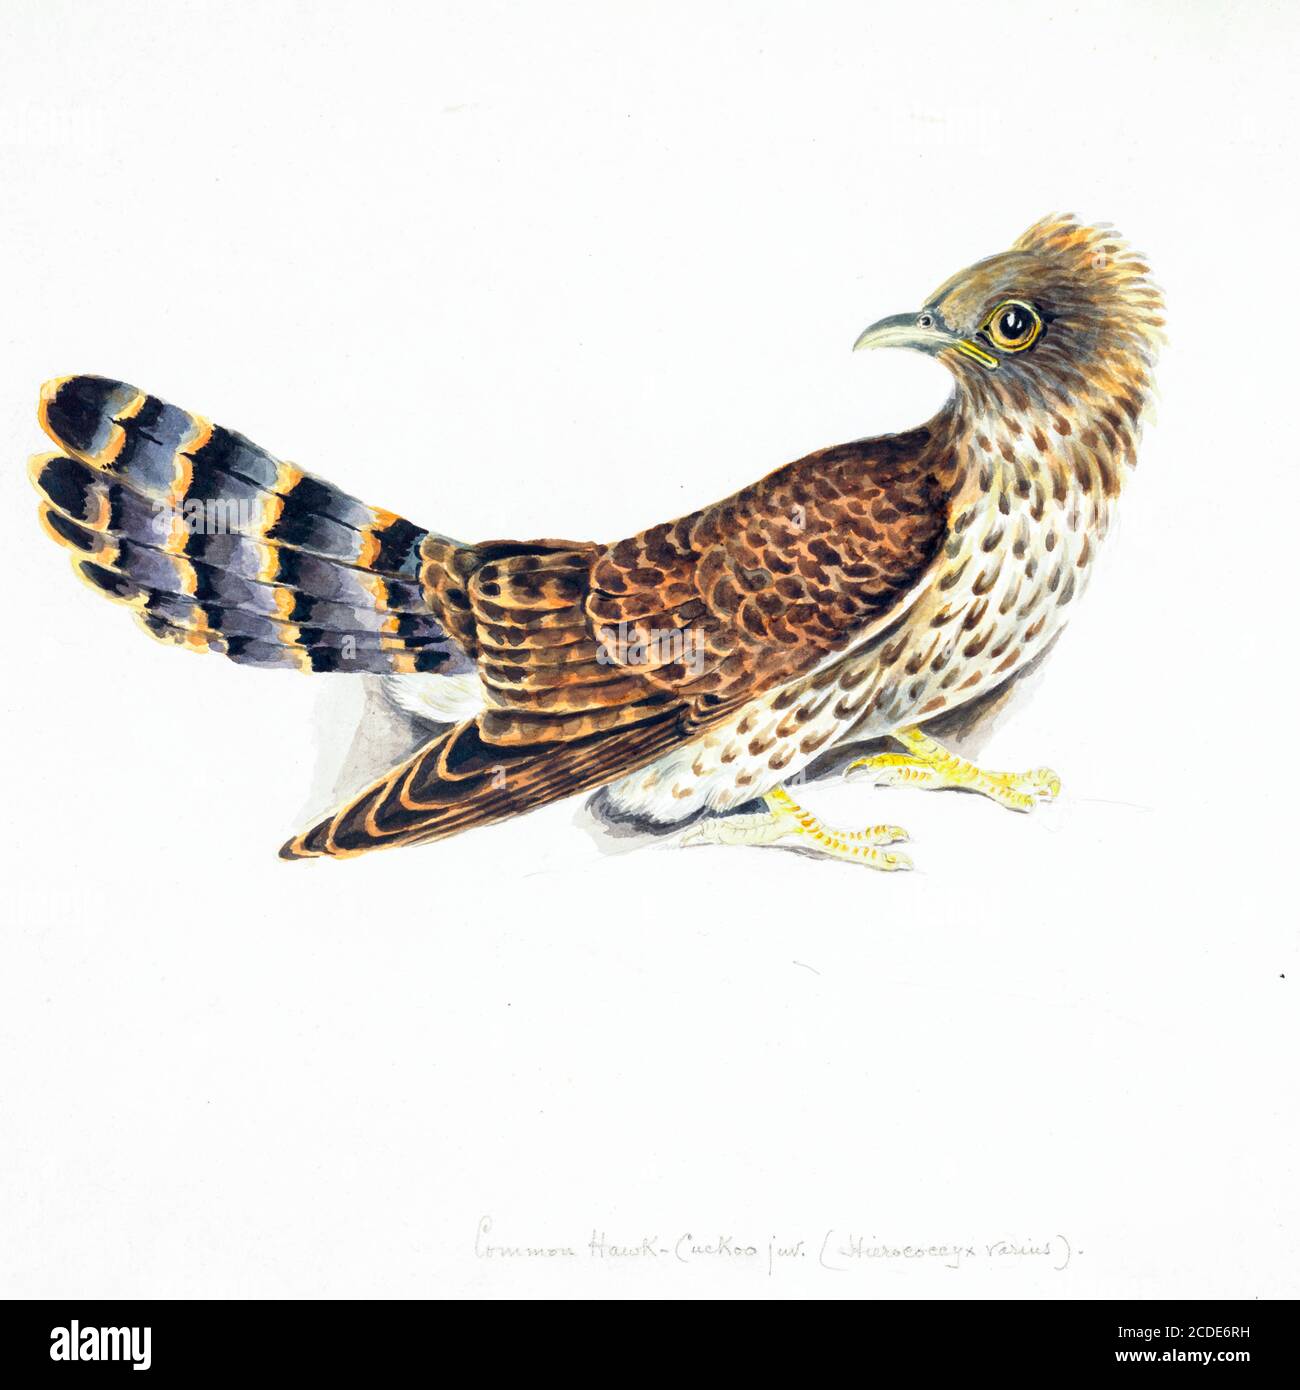 Common hawk-cuckoo (Hierococcyx varius Syn Cuculus varius) 18th century watercolor painting by Elizabeth Gwillim. Lady Elizabeth Symonds Gwillim (21 April 1763 – 21 December 1807) was an artist married to Sir Henry Gwillim, Puisne Judge at the Madras high court until 1808. Lady Gwillim painted a series of about 200 watercolours of Indian birds. Produced about 20 years before John James Audubon, her work has been acclaimed for its accuracy and natural postures as they were drawn from observations of the birds in life. She also painted fishes and flowers. Stock Photo